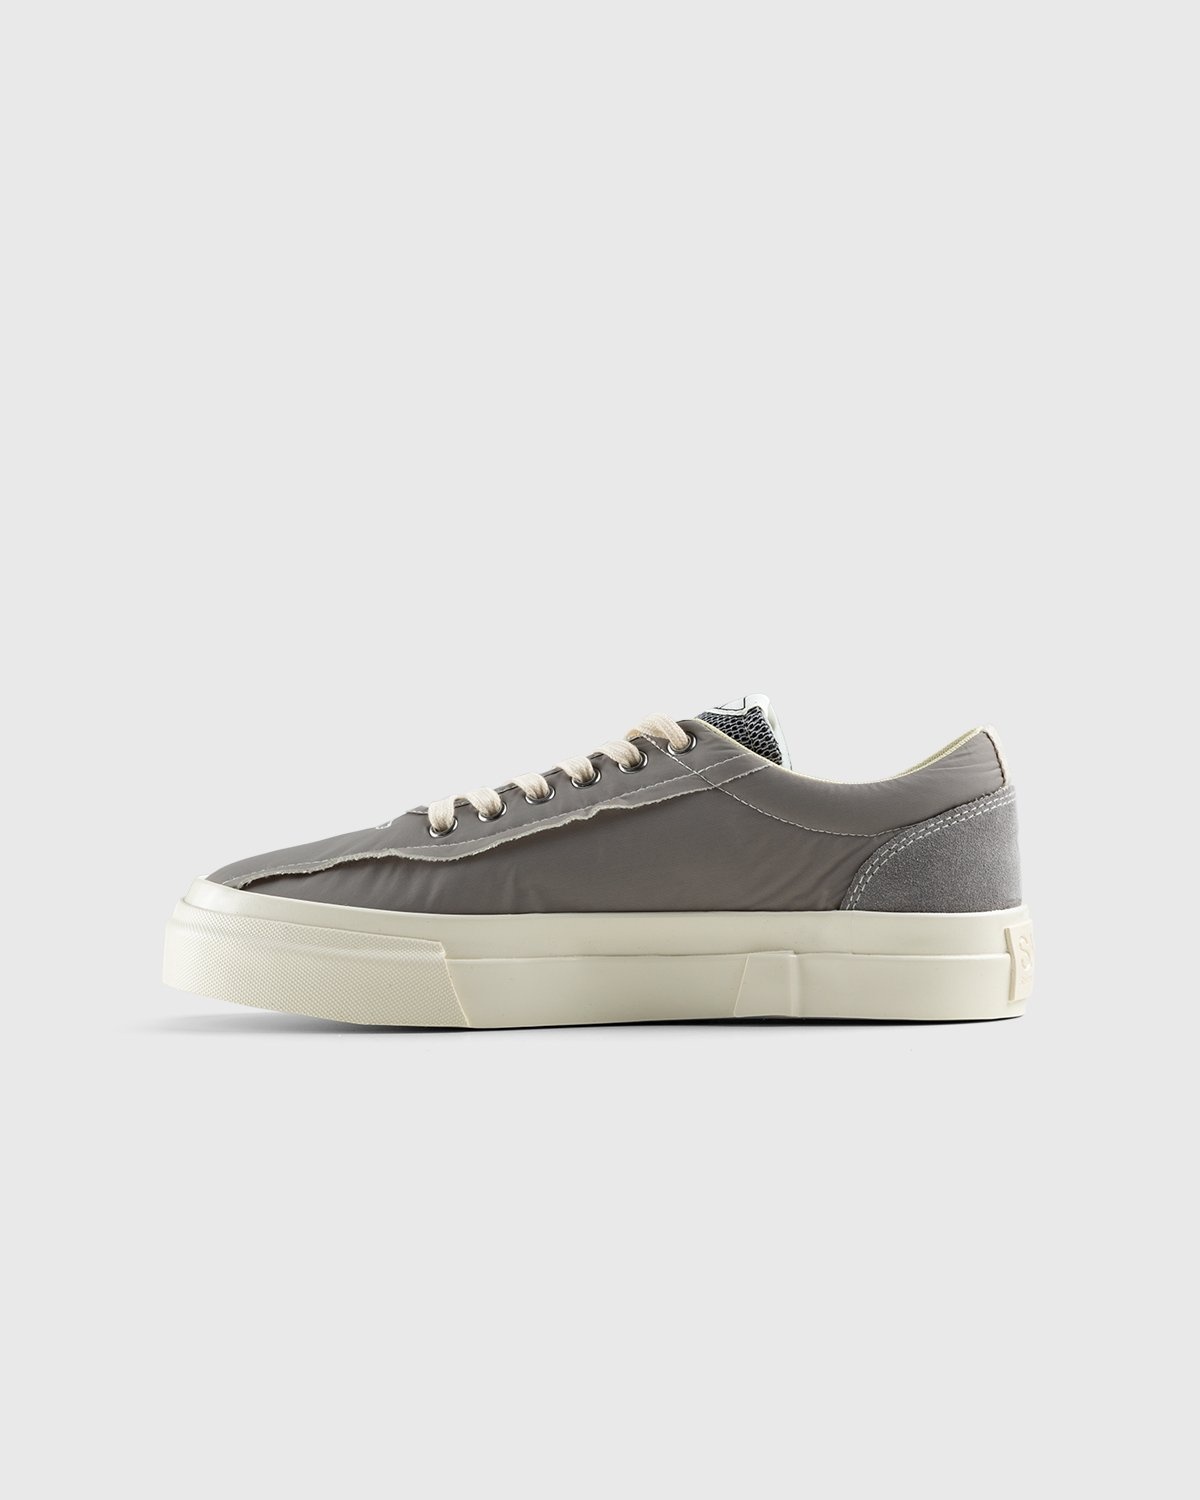 Stepney Workers Club – Dellow Track Raw Nylon Grey - Low Top Sneakers - Grey - Image 2